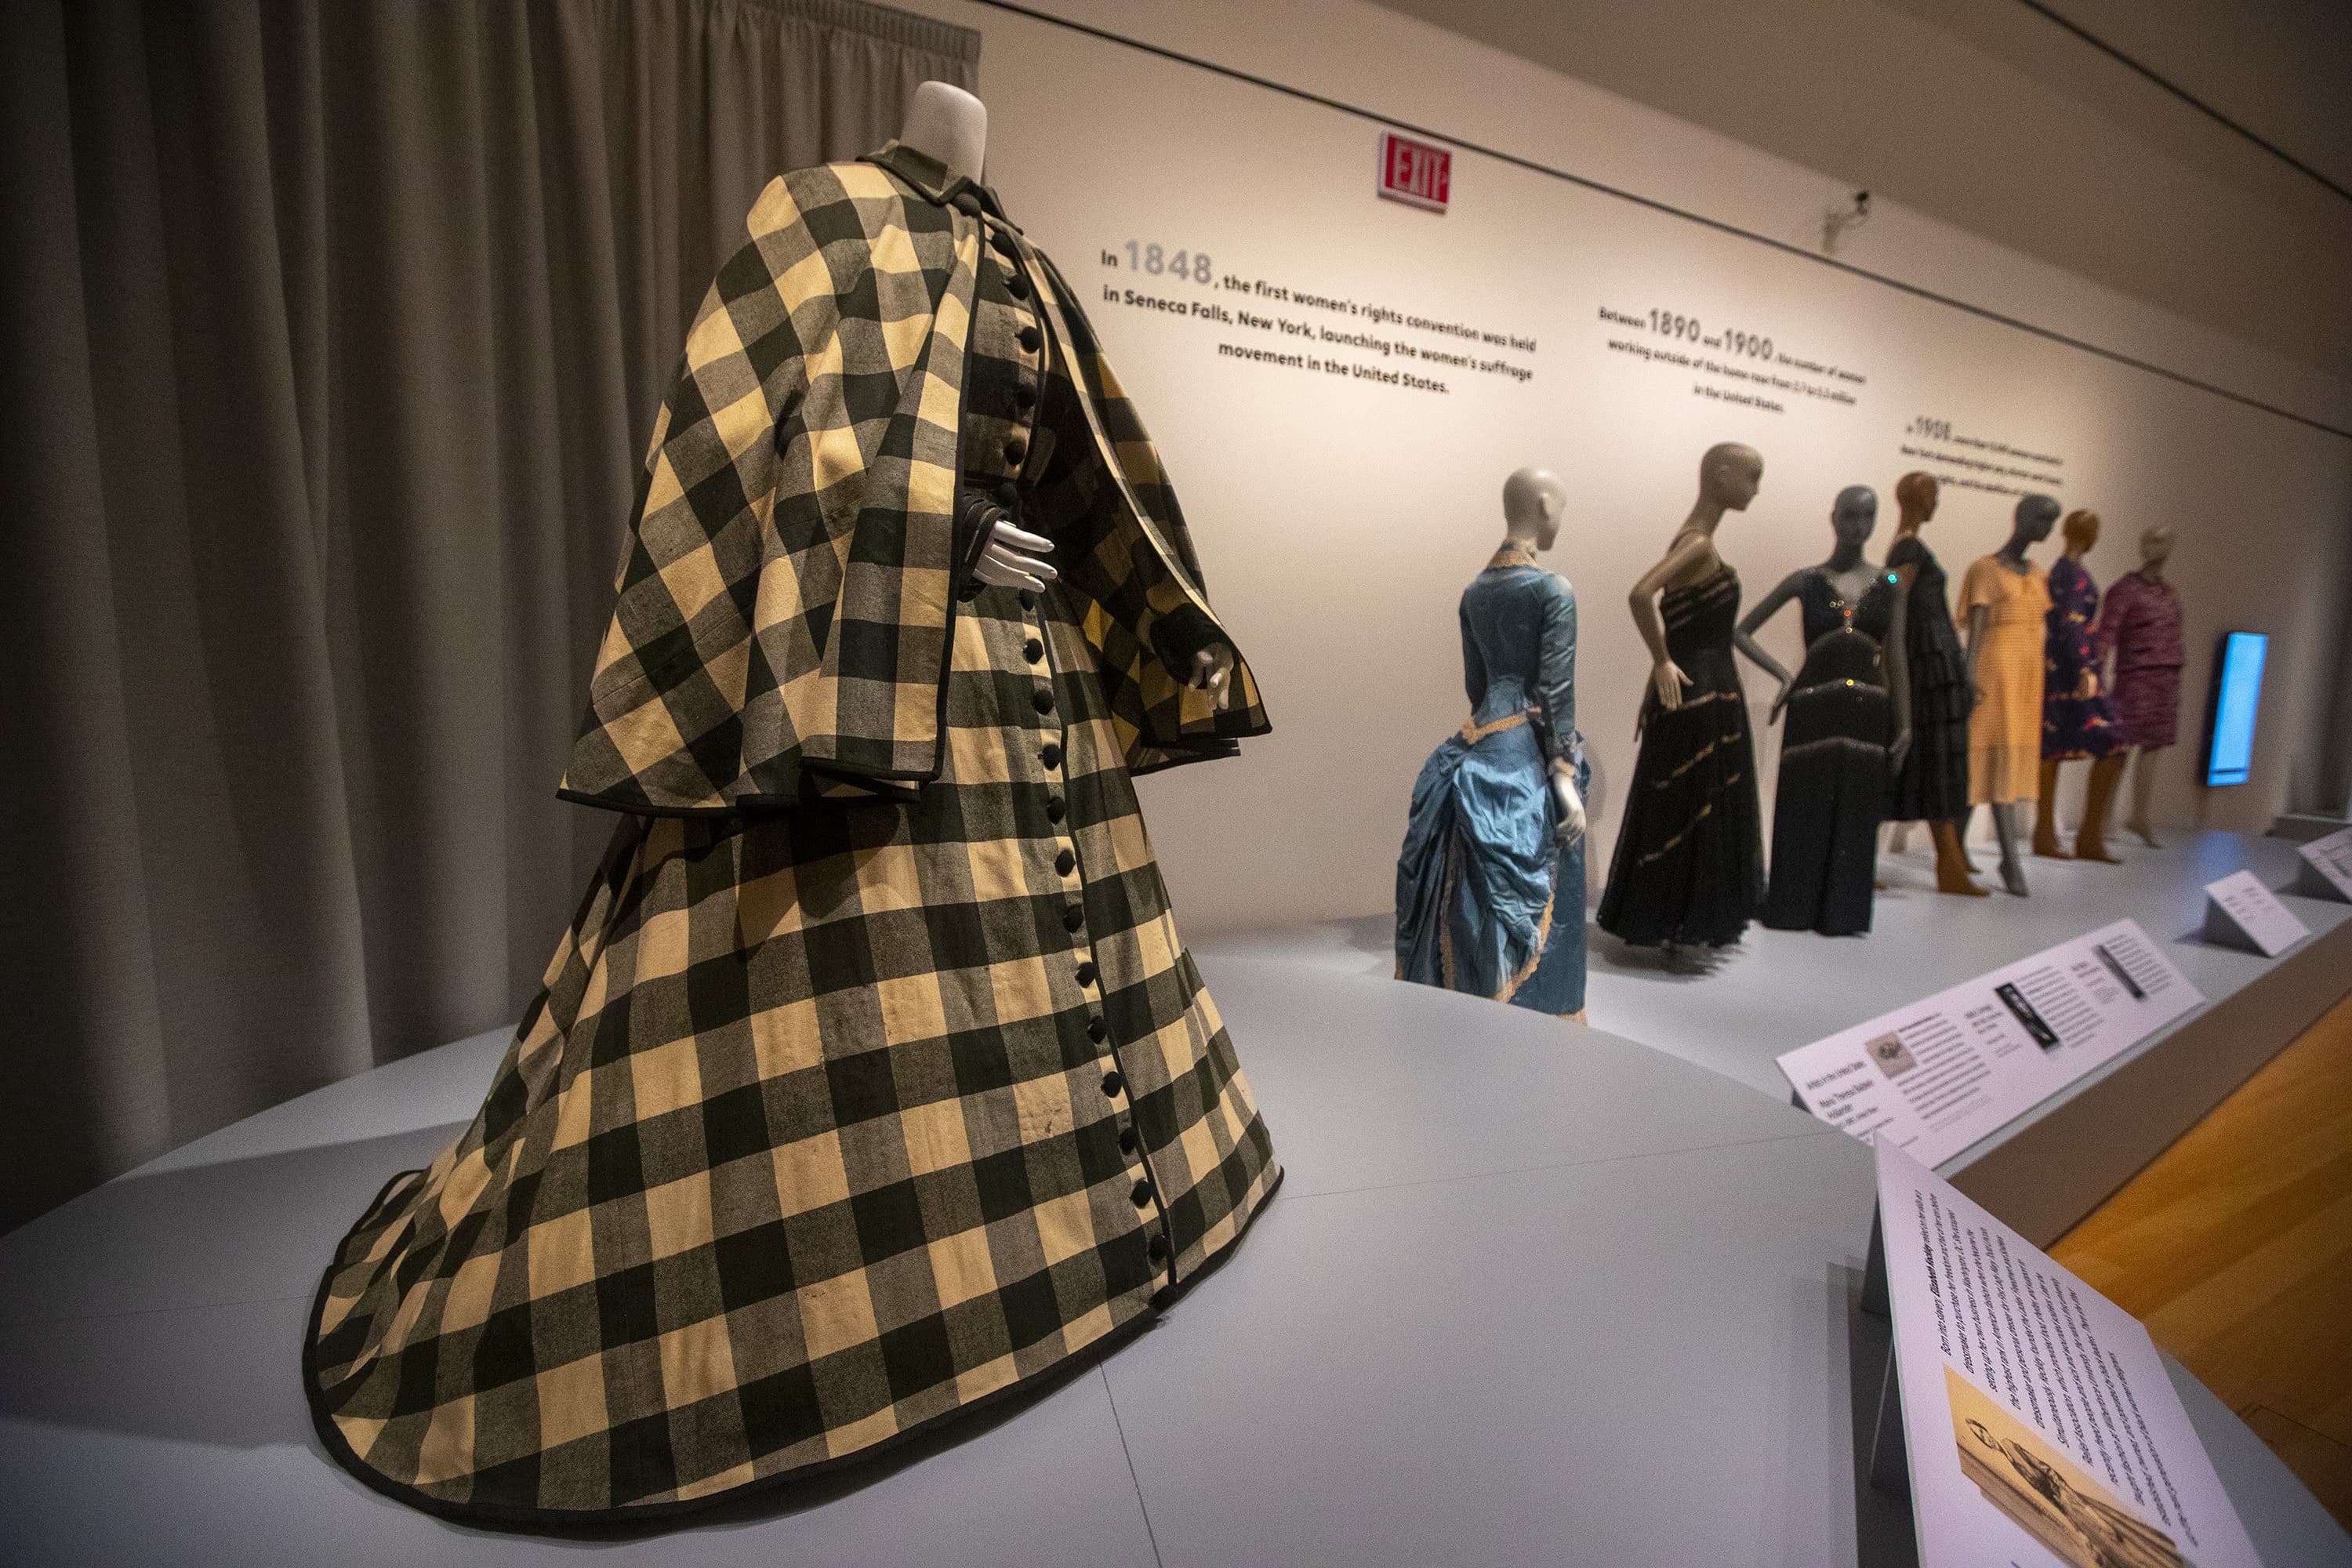 A dress probably attributed to Elizabeth Keckly which was worn by Mary Todd Lincoln from 1862-64. (Jesse Costa/WBUR)